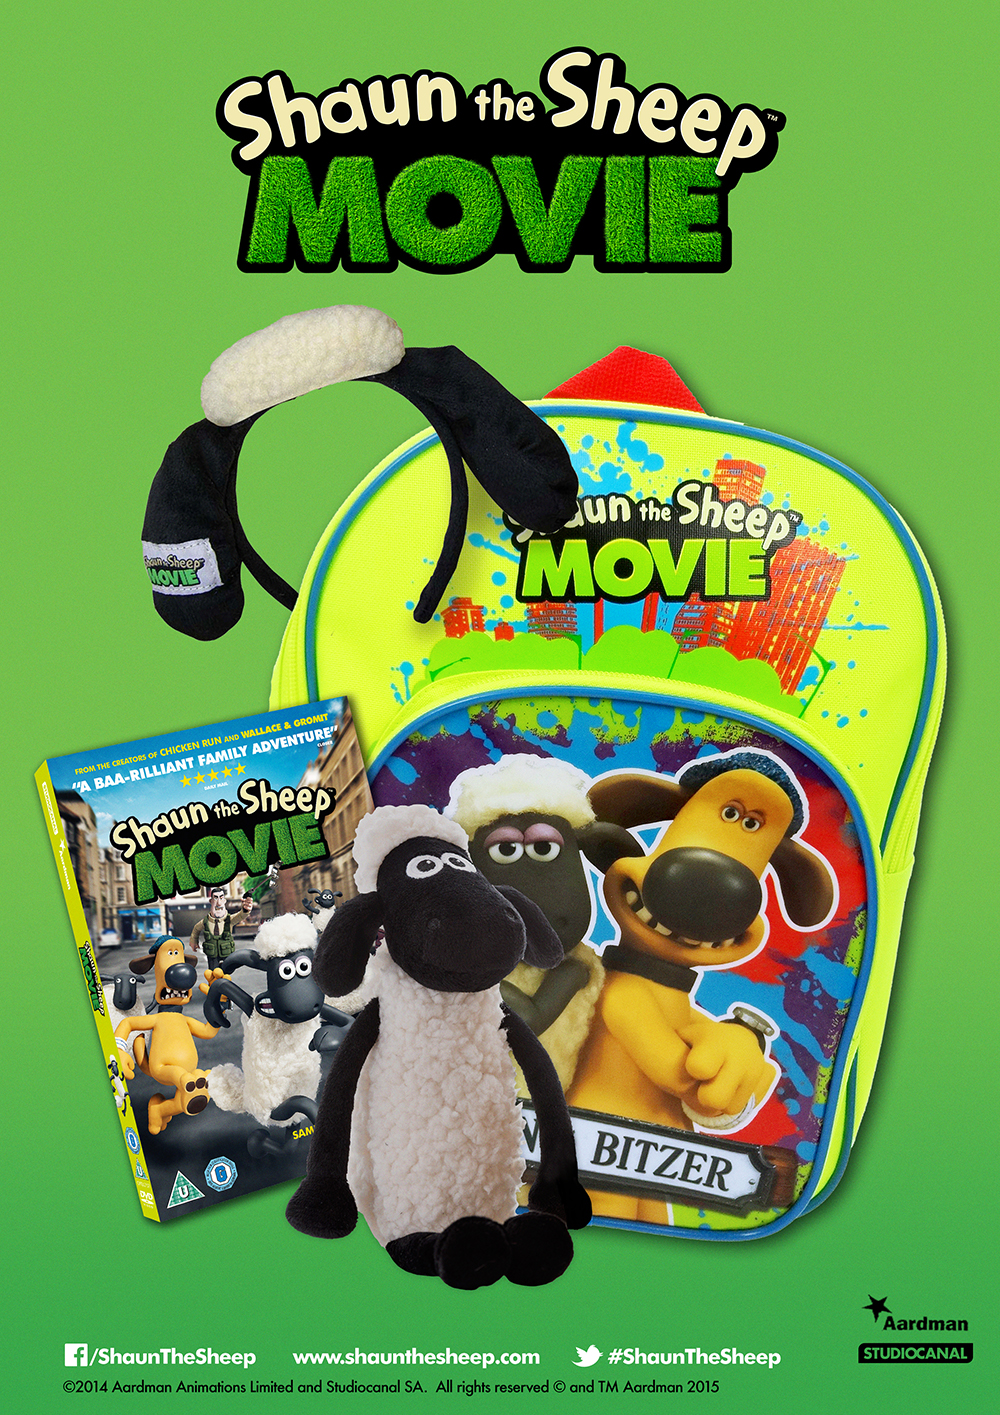 Shaun the Sheep competition prizes